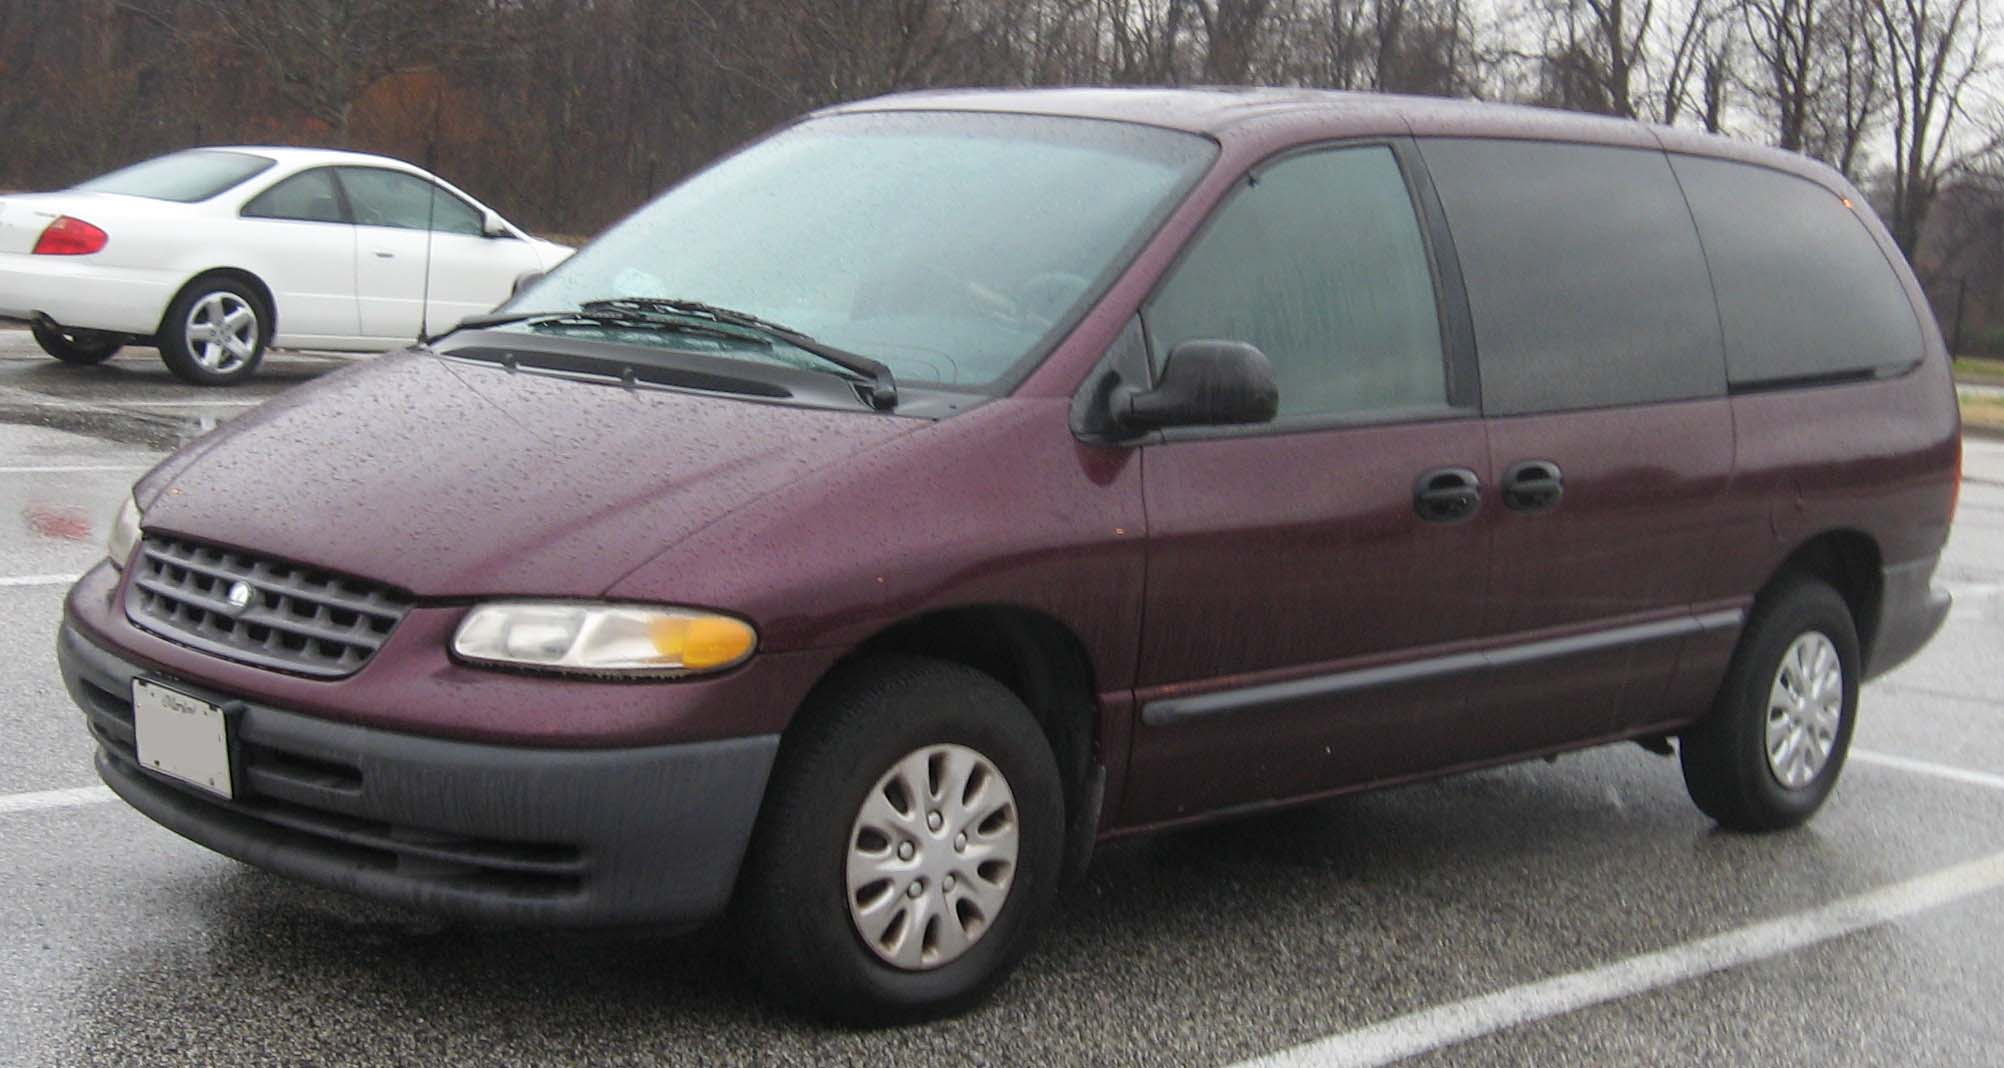 96 plymouth voyager no spark